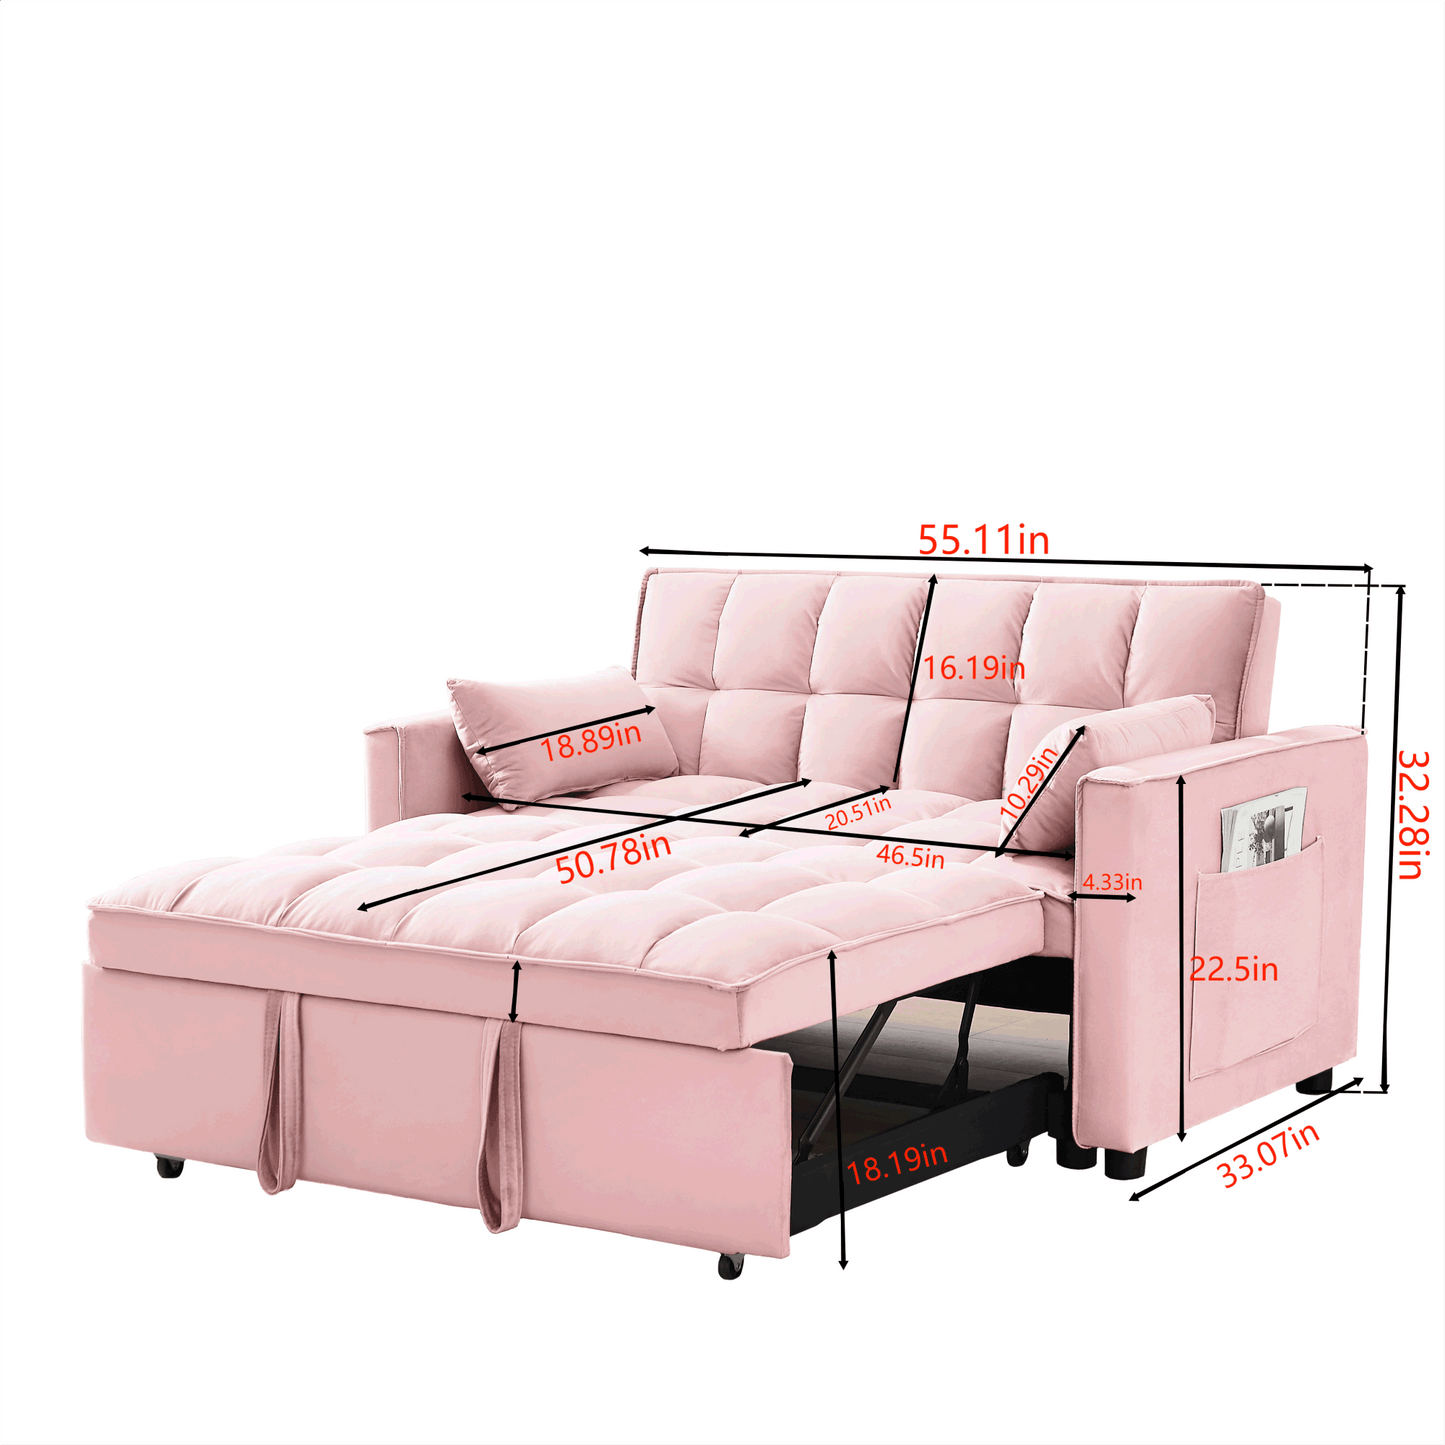 Modern Velvet Loveseat Futon Sofa Couch w/Pullout Bed,Small Love Seat Lounge Sofa w/Reclining Backrest,Toss Pillows, Pockets,Furniture for Living Room,3 in 1 Convertible Sleeper Sofa Bed, pink